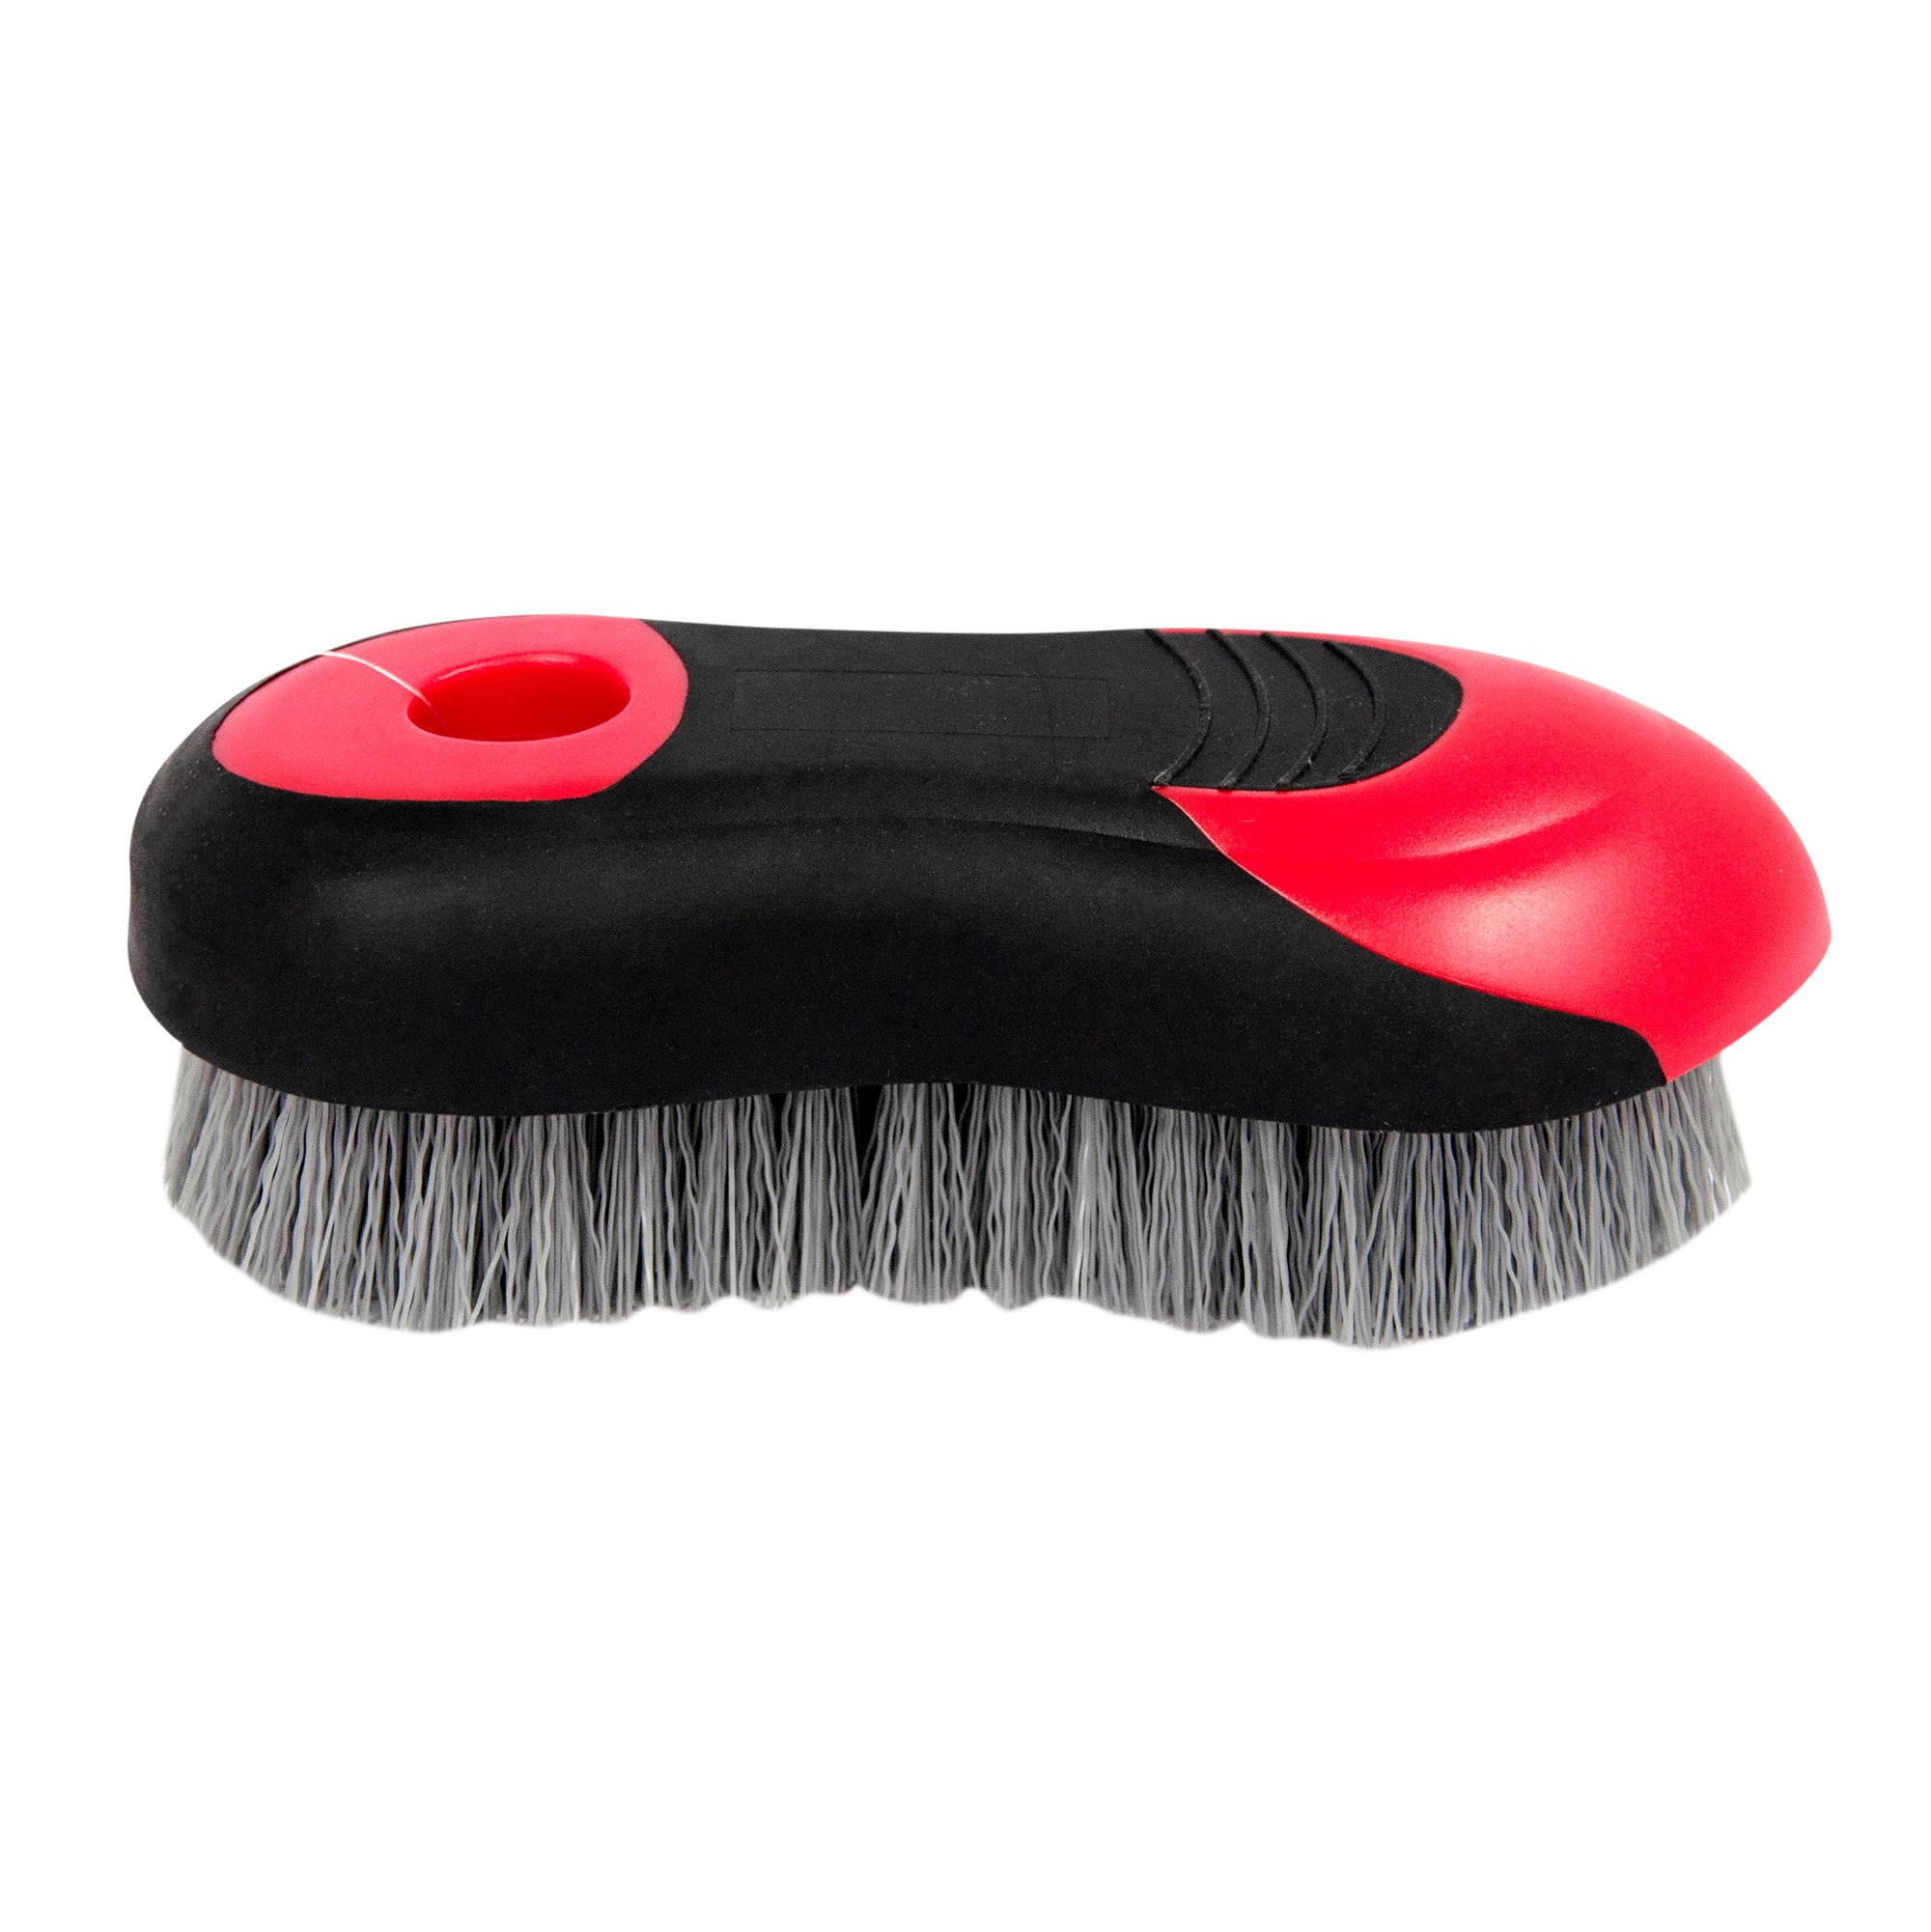 Upholstery & Leather Soft bristle Cleaning Brush